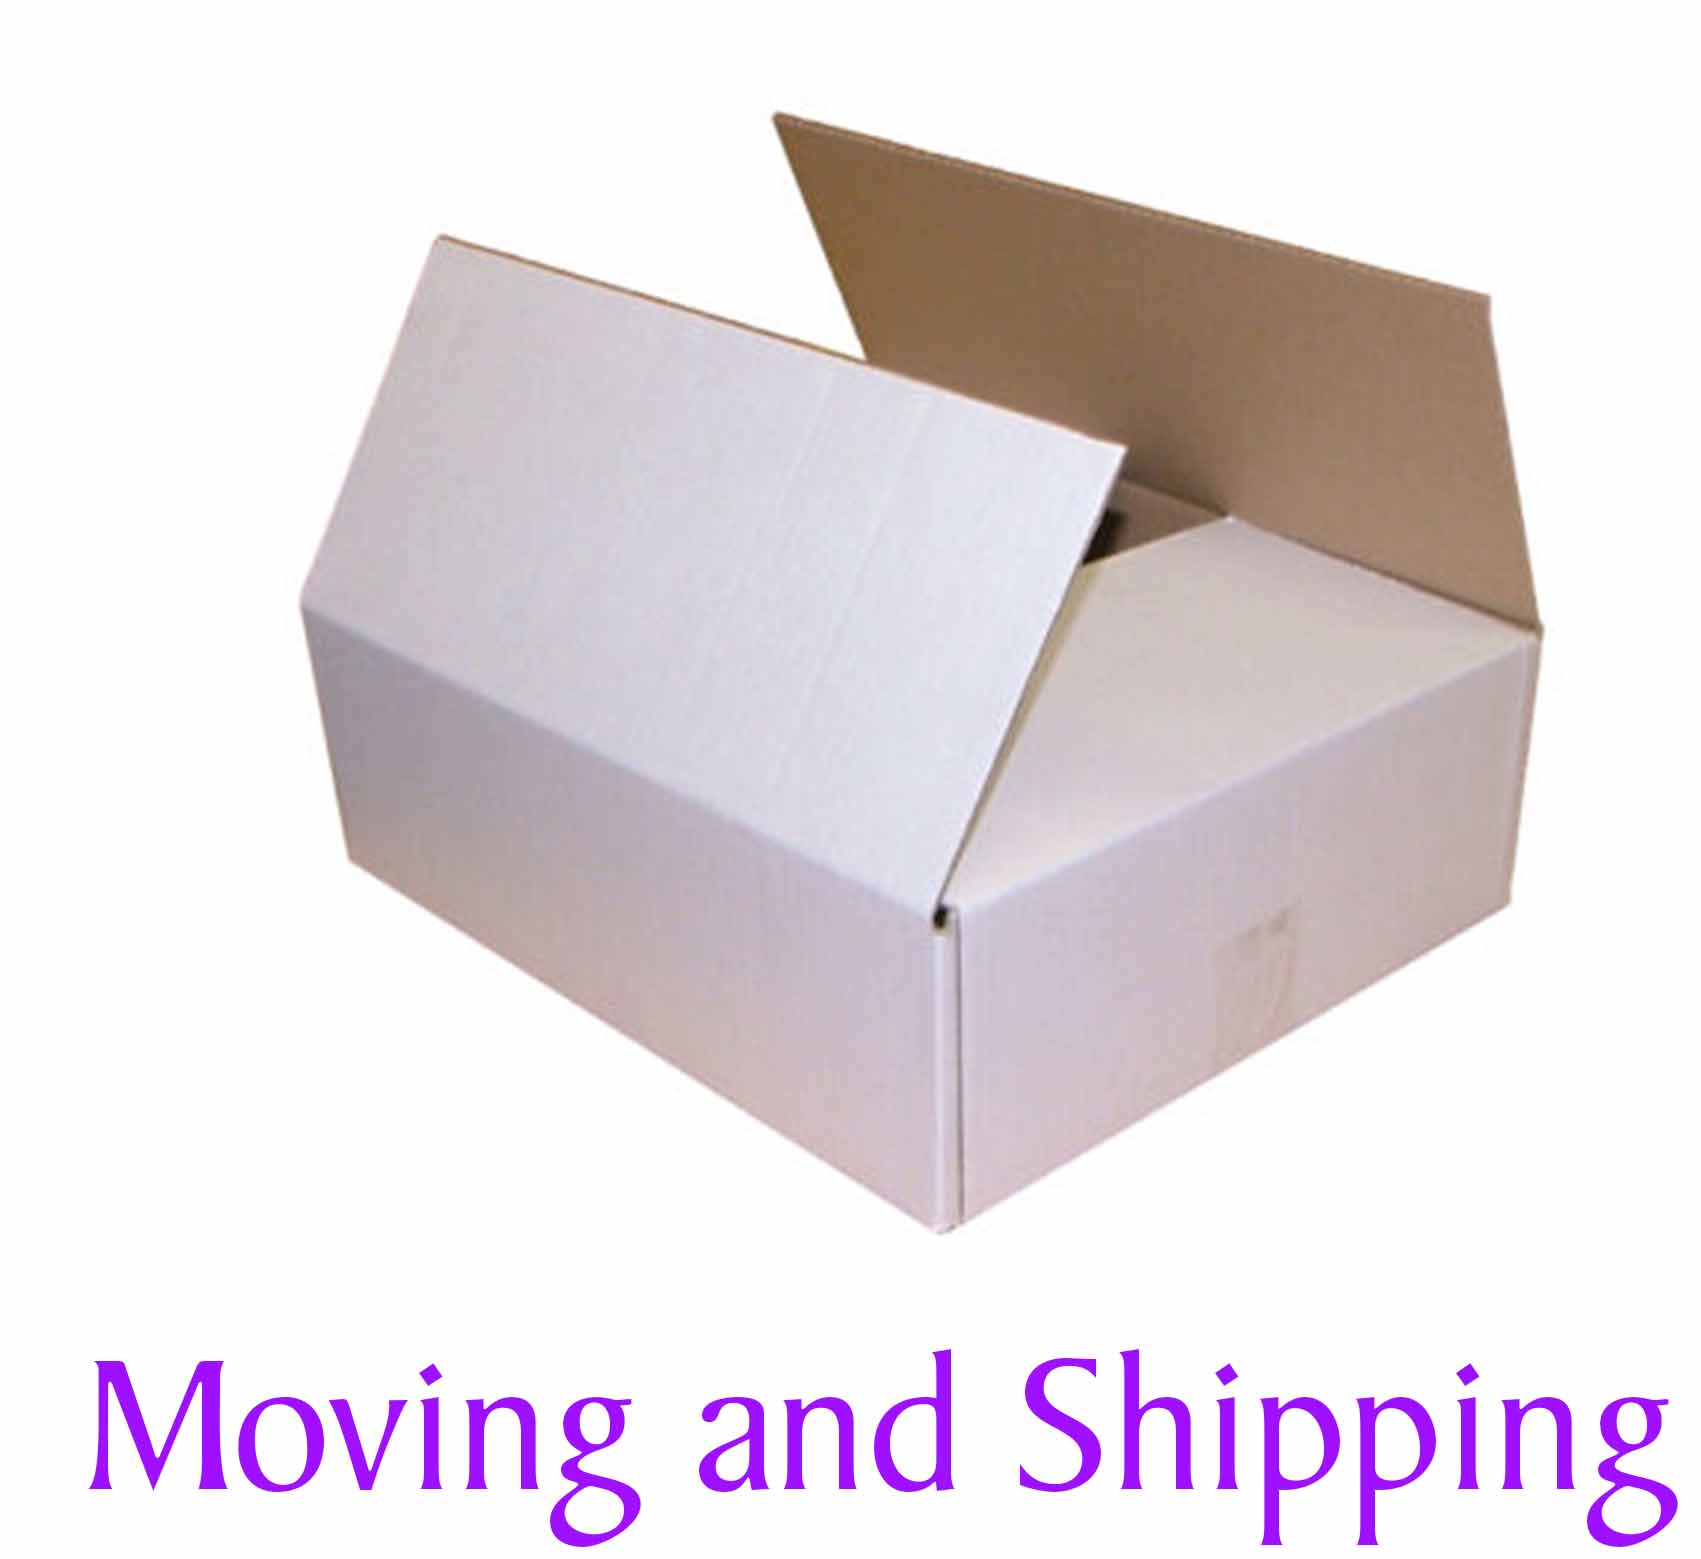 shipping boxes, cardboard boxes, single walled boxes, moving packs,